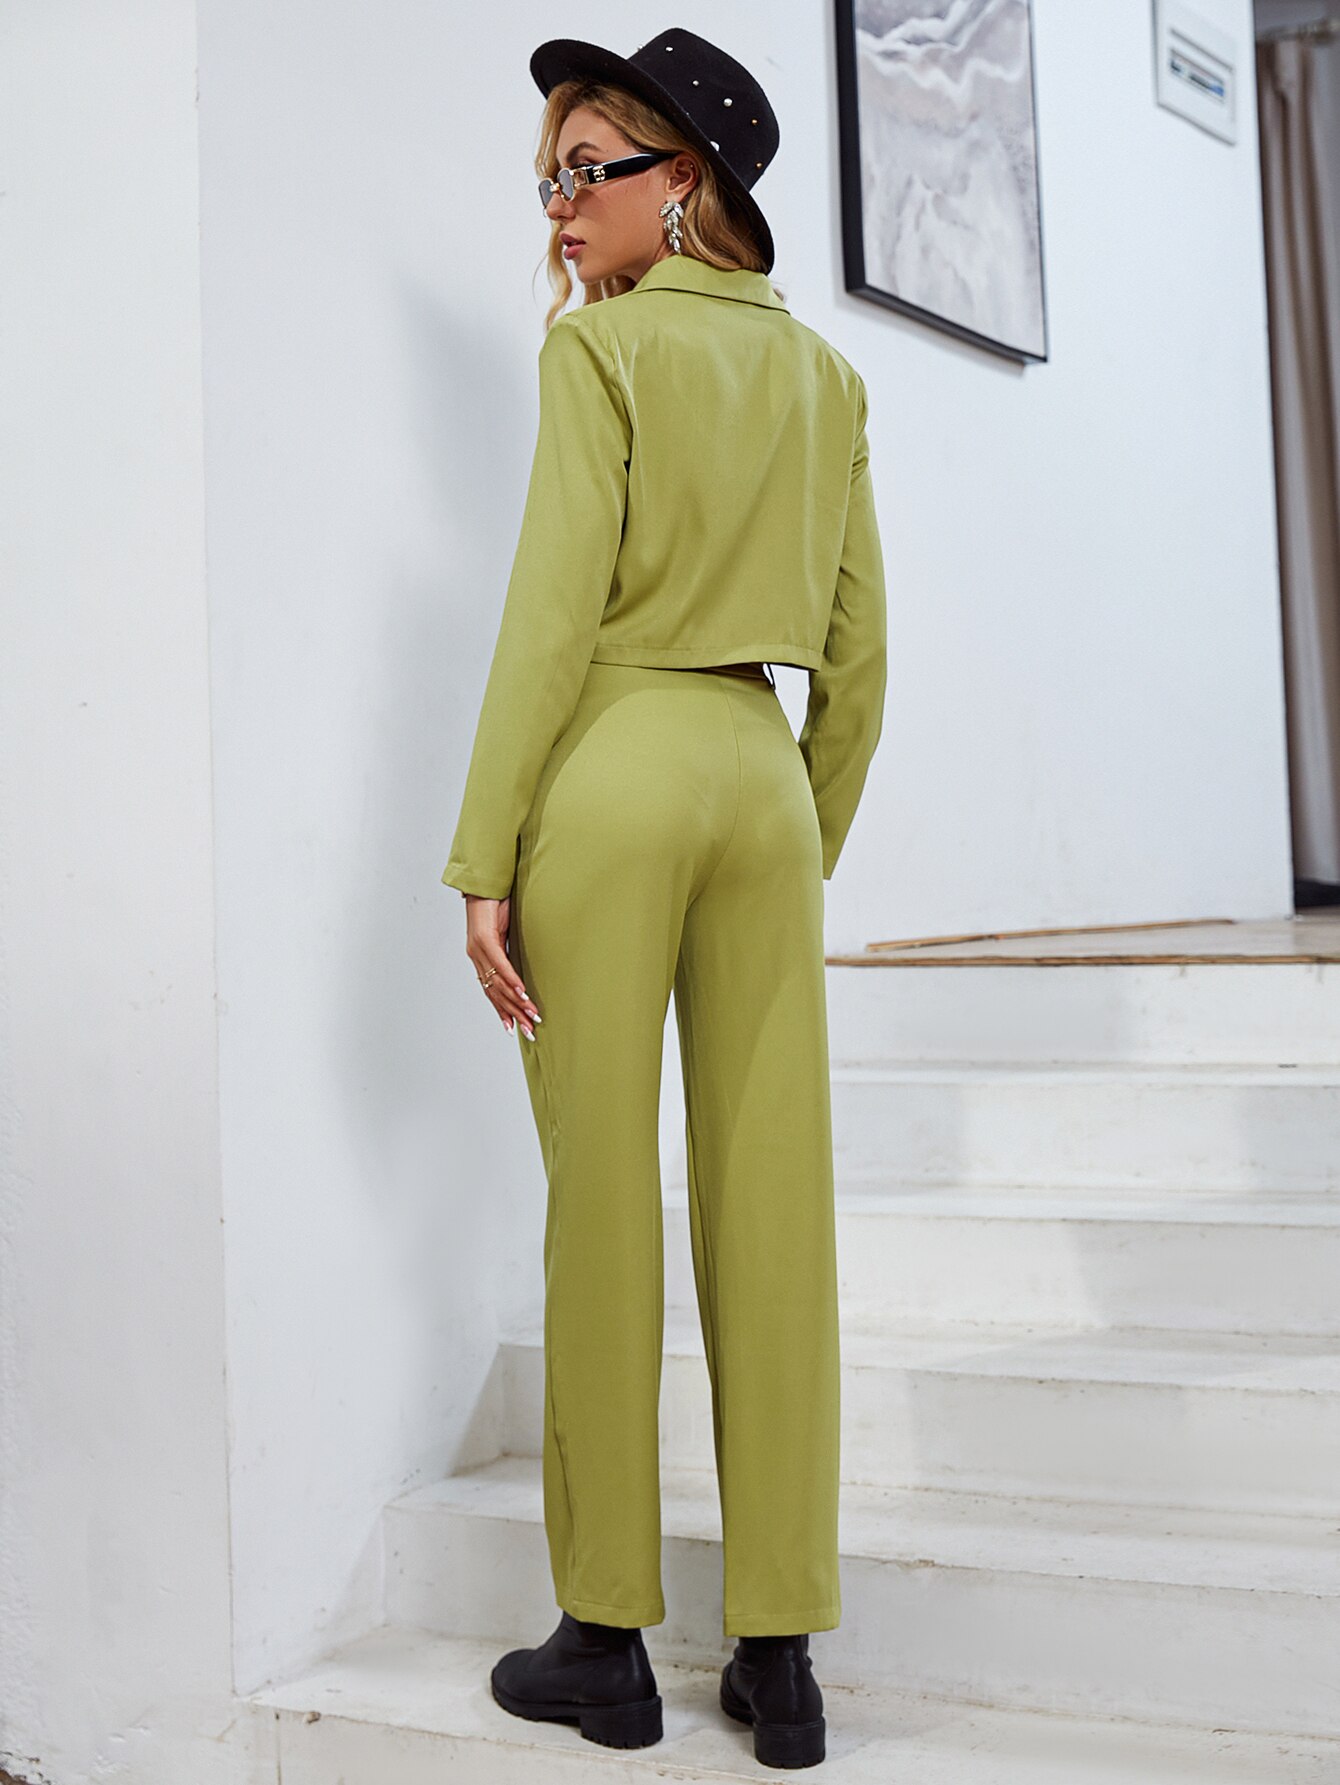 Simplee-Office-v-neck-long-sleeves-crop-top-pant-set-Notched-button-belt-high-waist-pants-4